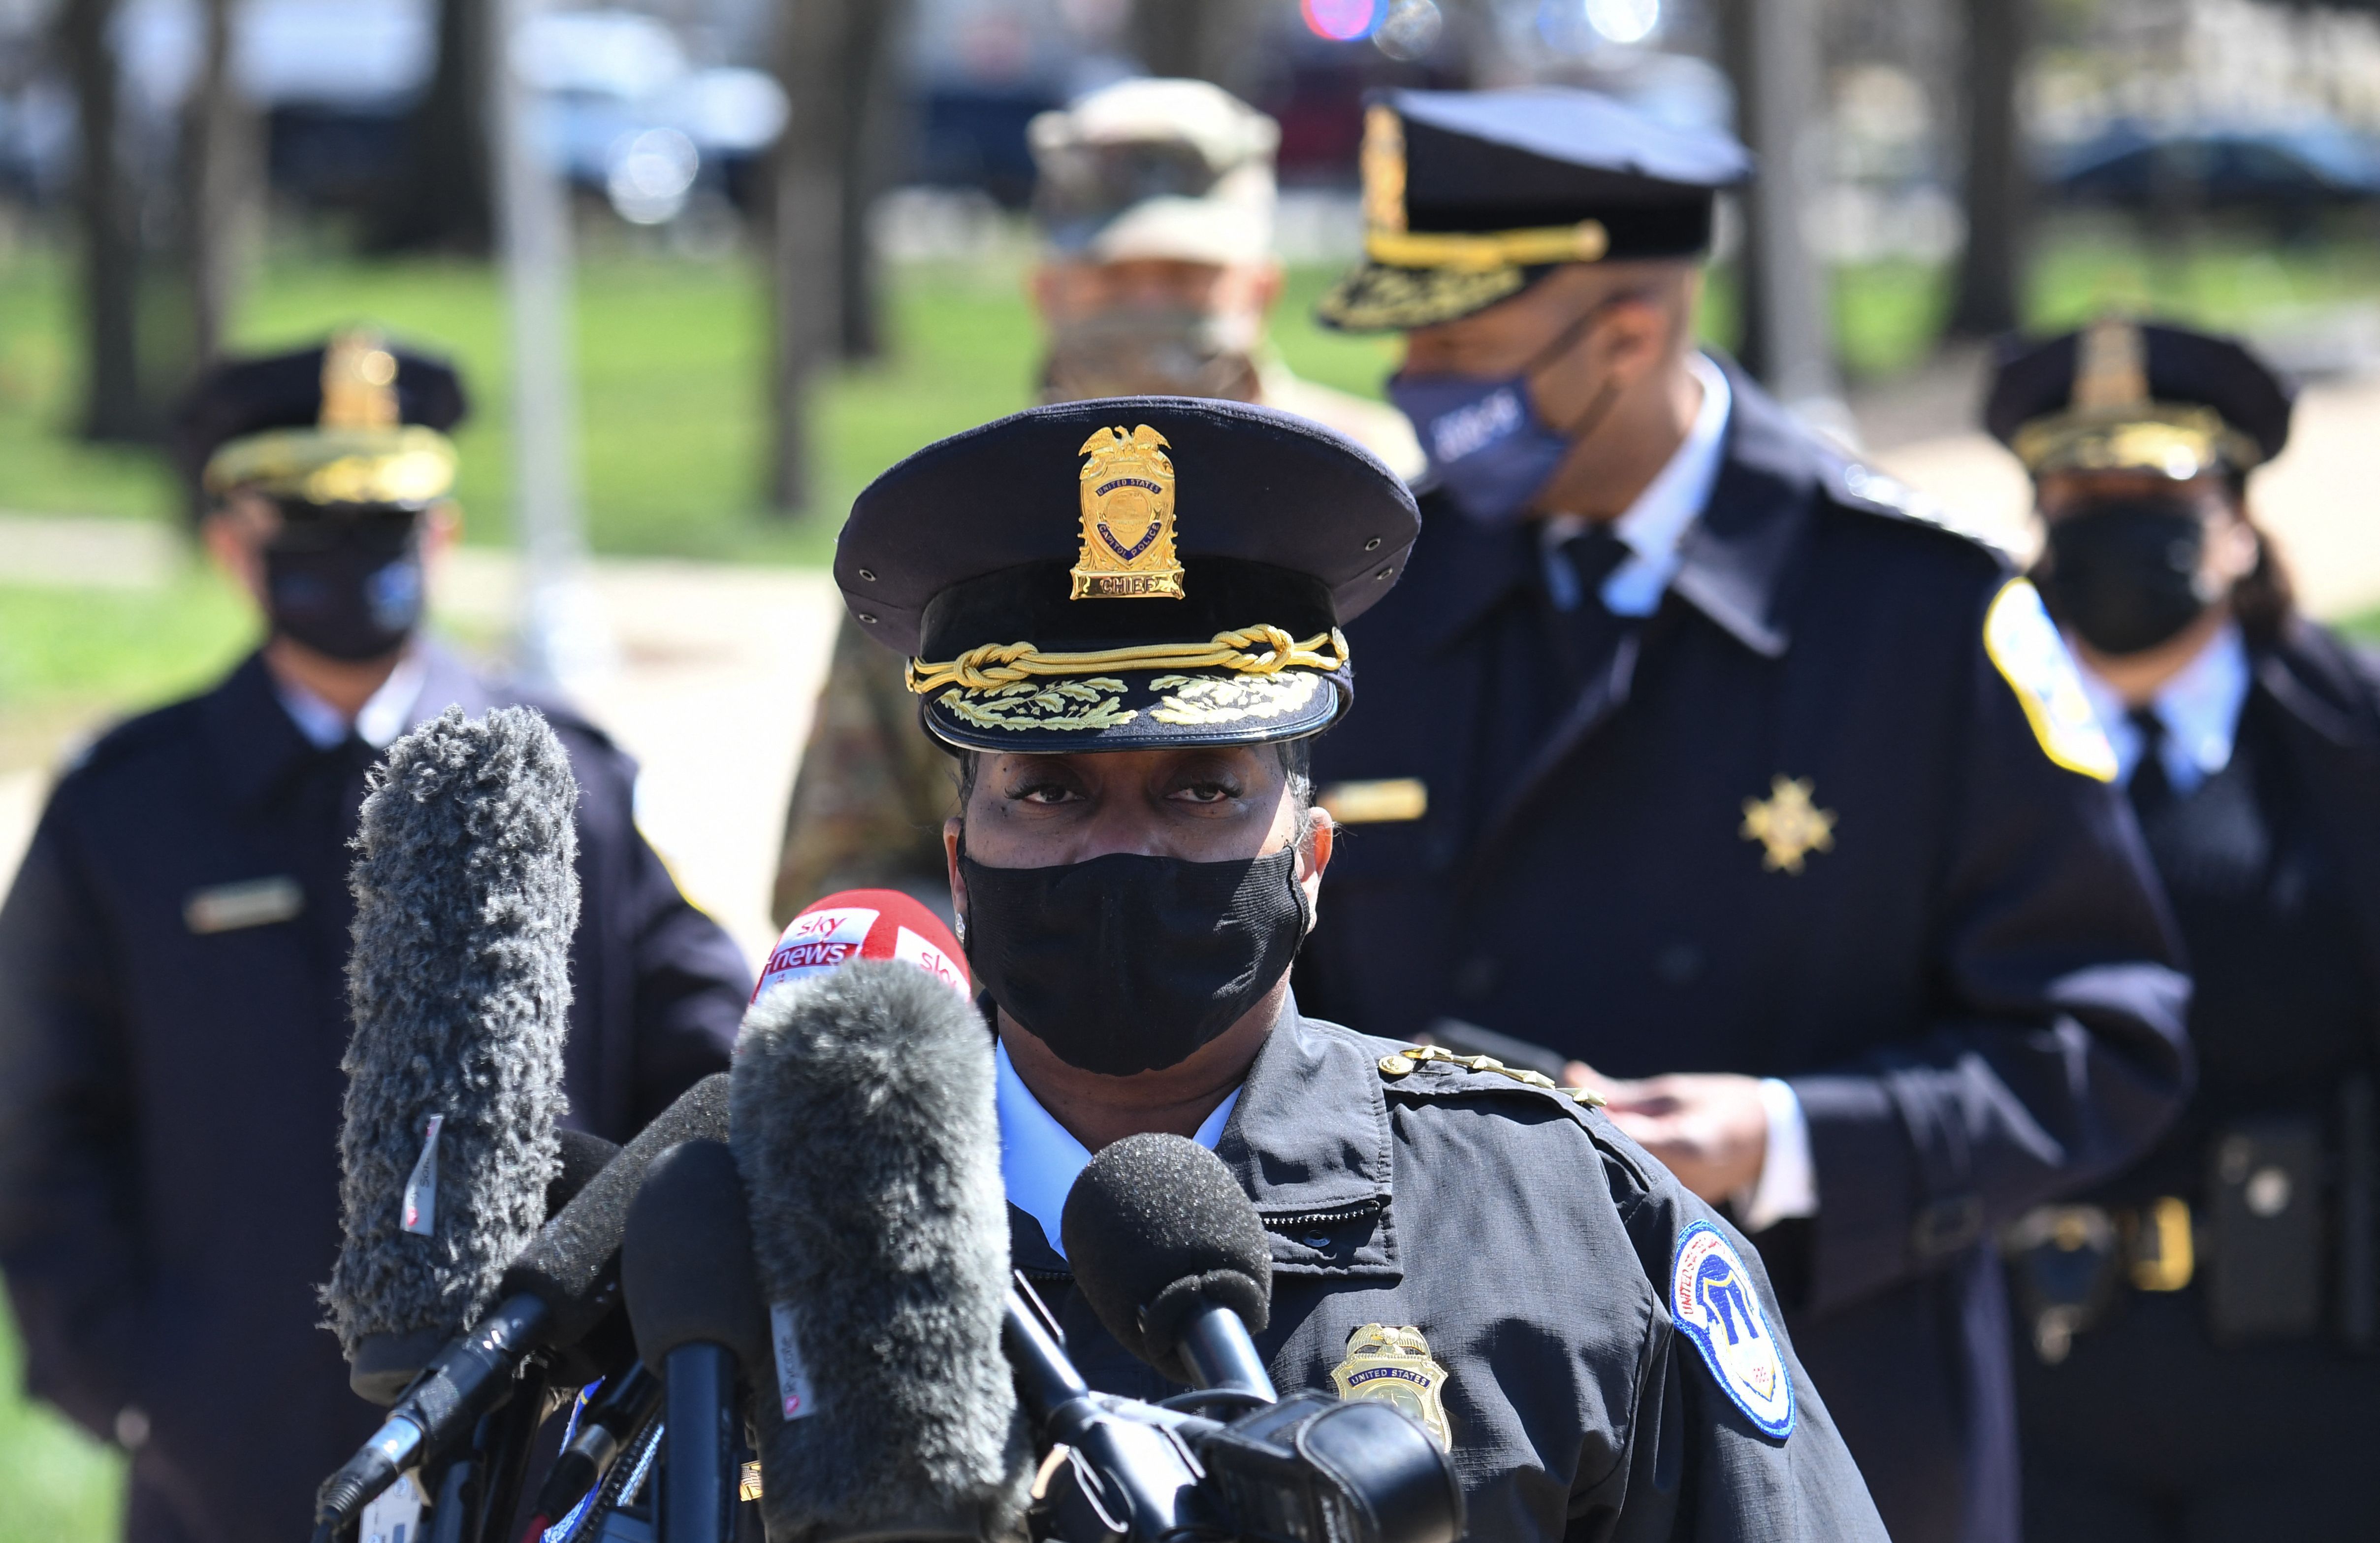 Acting Chief of Capitol Police Yogananda Pittman speaking during a press conference in Washington, D.C. on April 2.